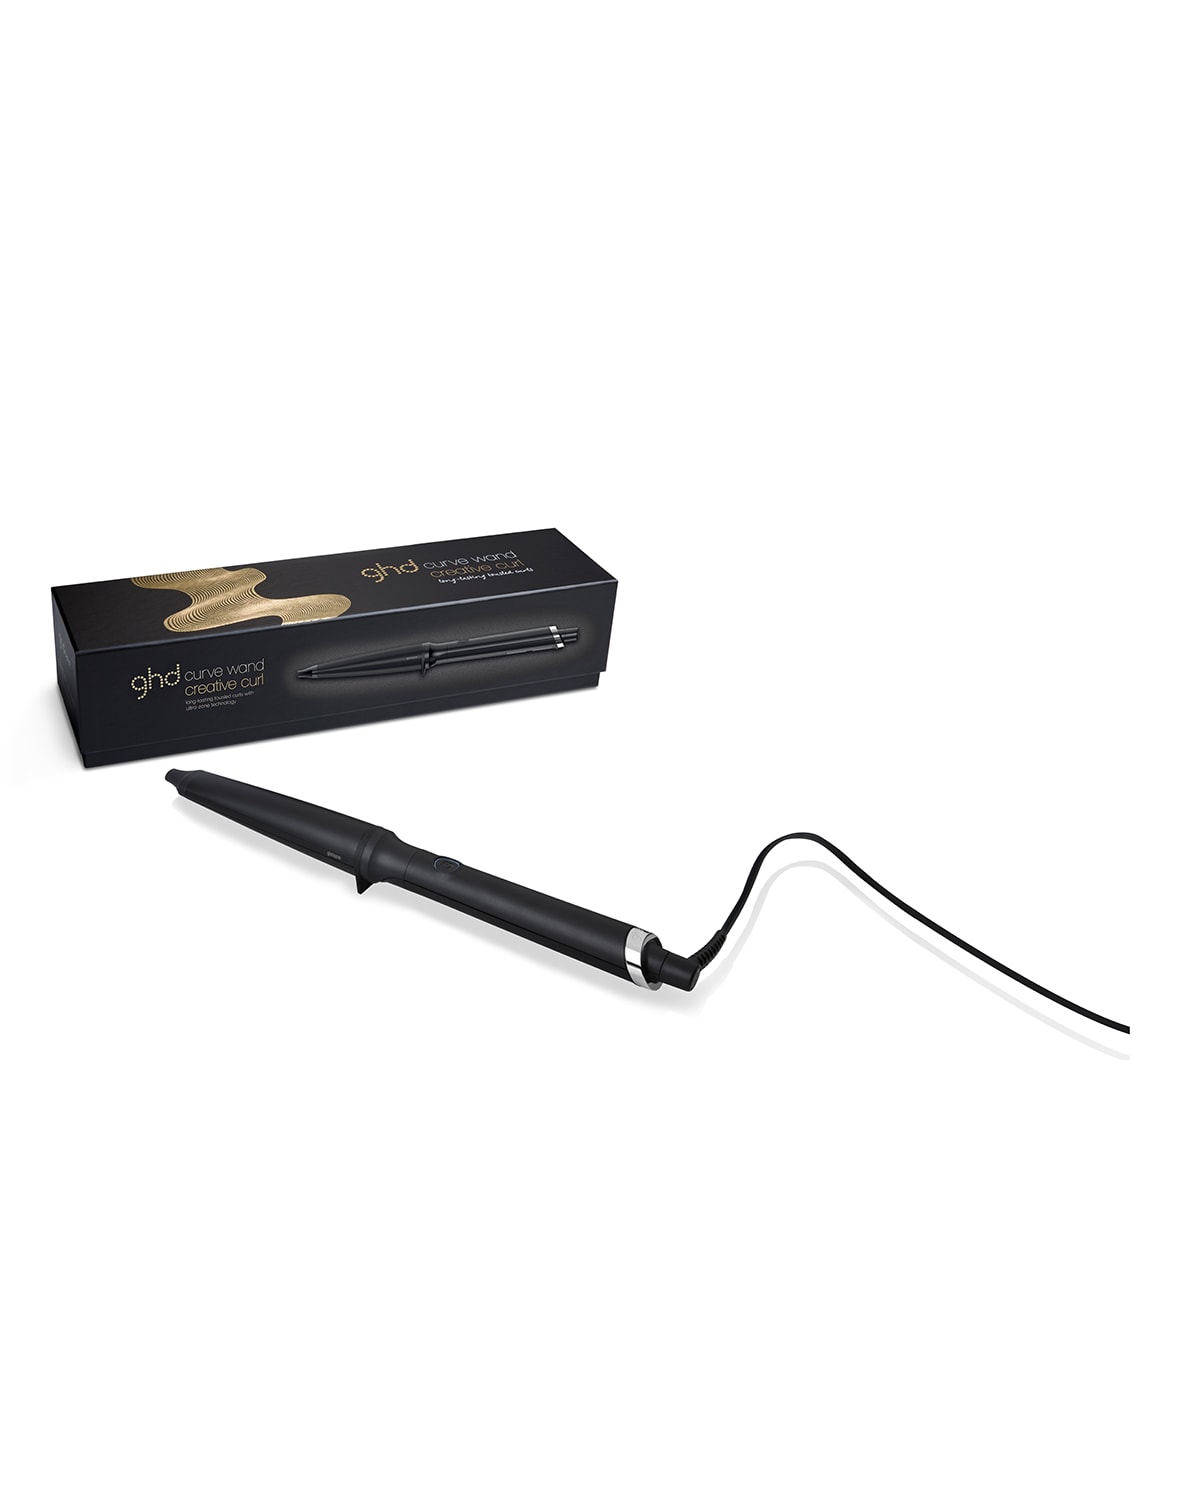 ghd Creative Curl - Tapered Curling Wand